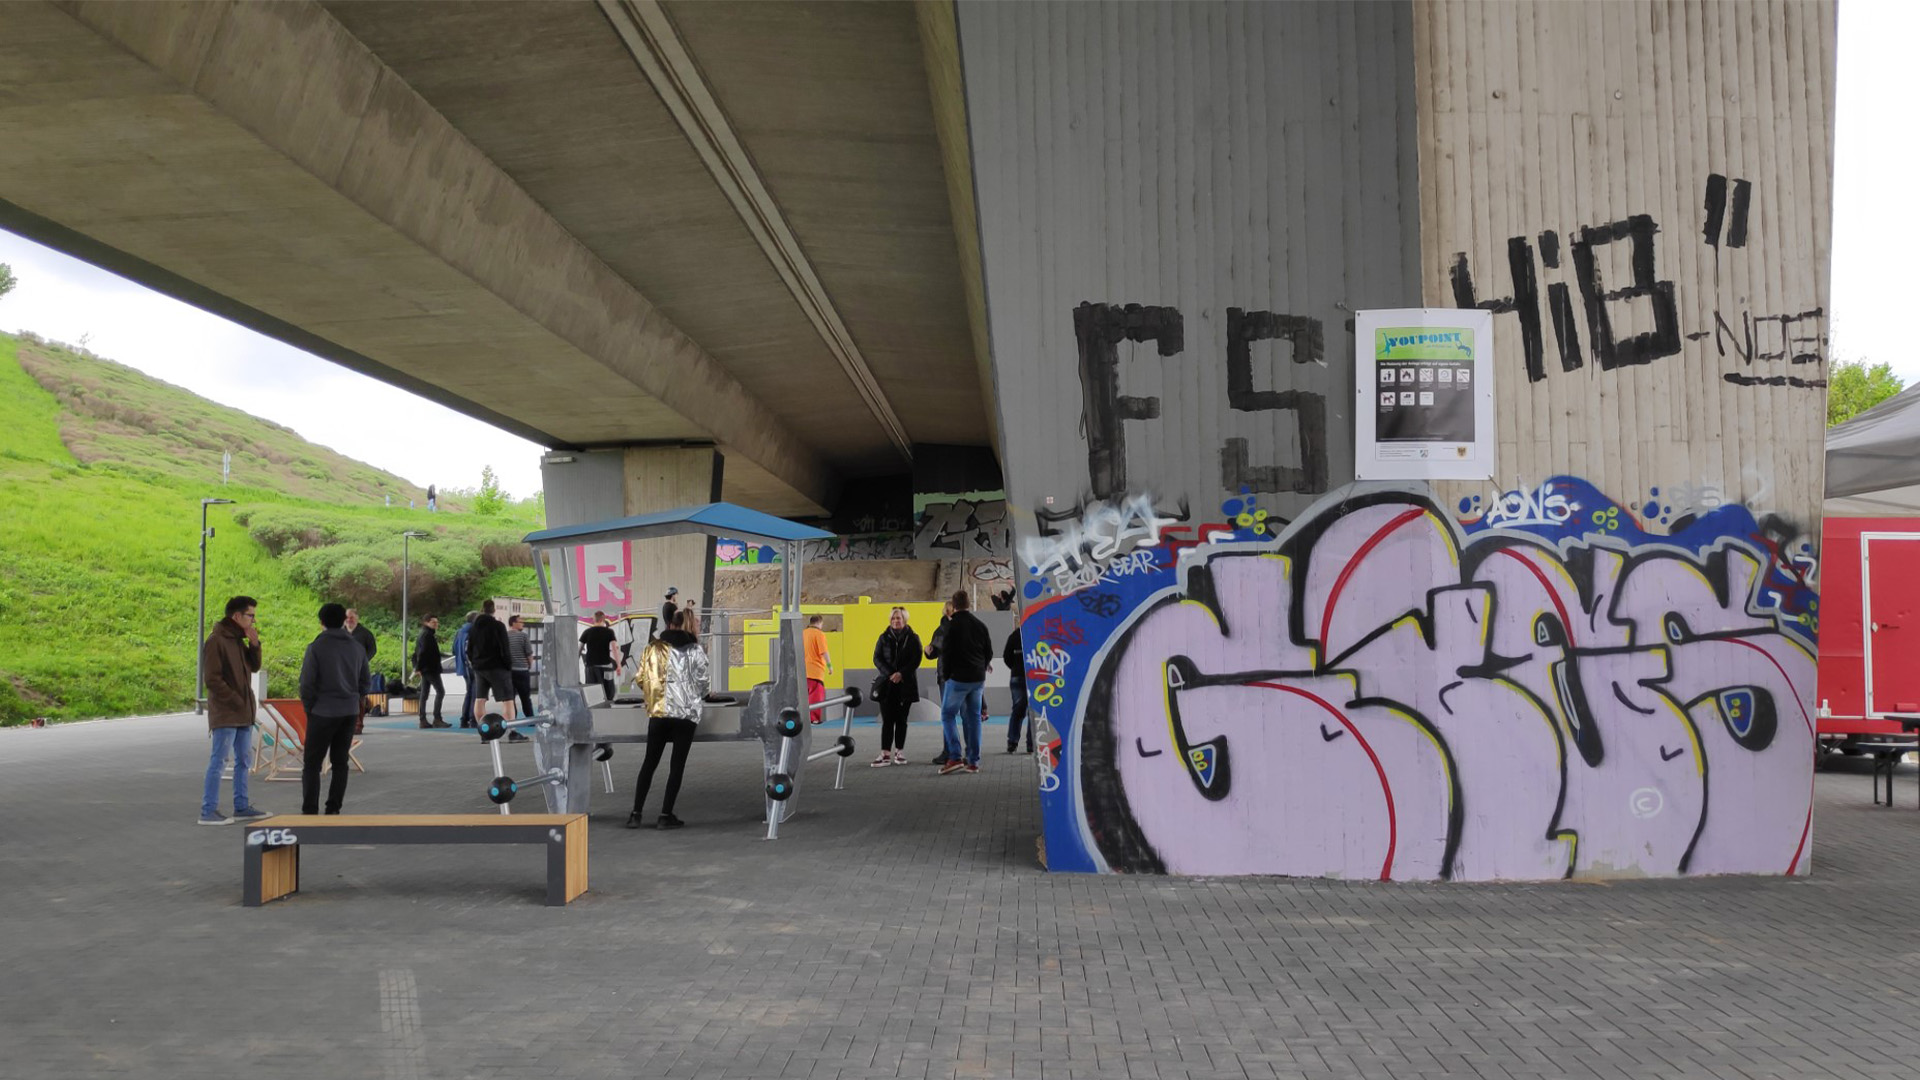 People are gathered under a highway bridge near graffiti-covered pillars. Some are interacting with art installations or hanging out near a picnic bench. The setting includes a park-like area with grassy slopes in the background.